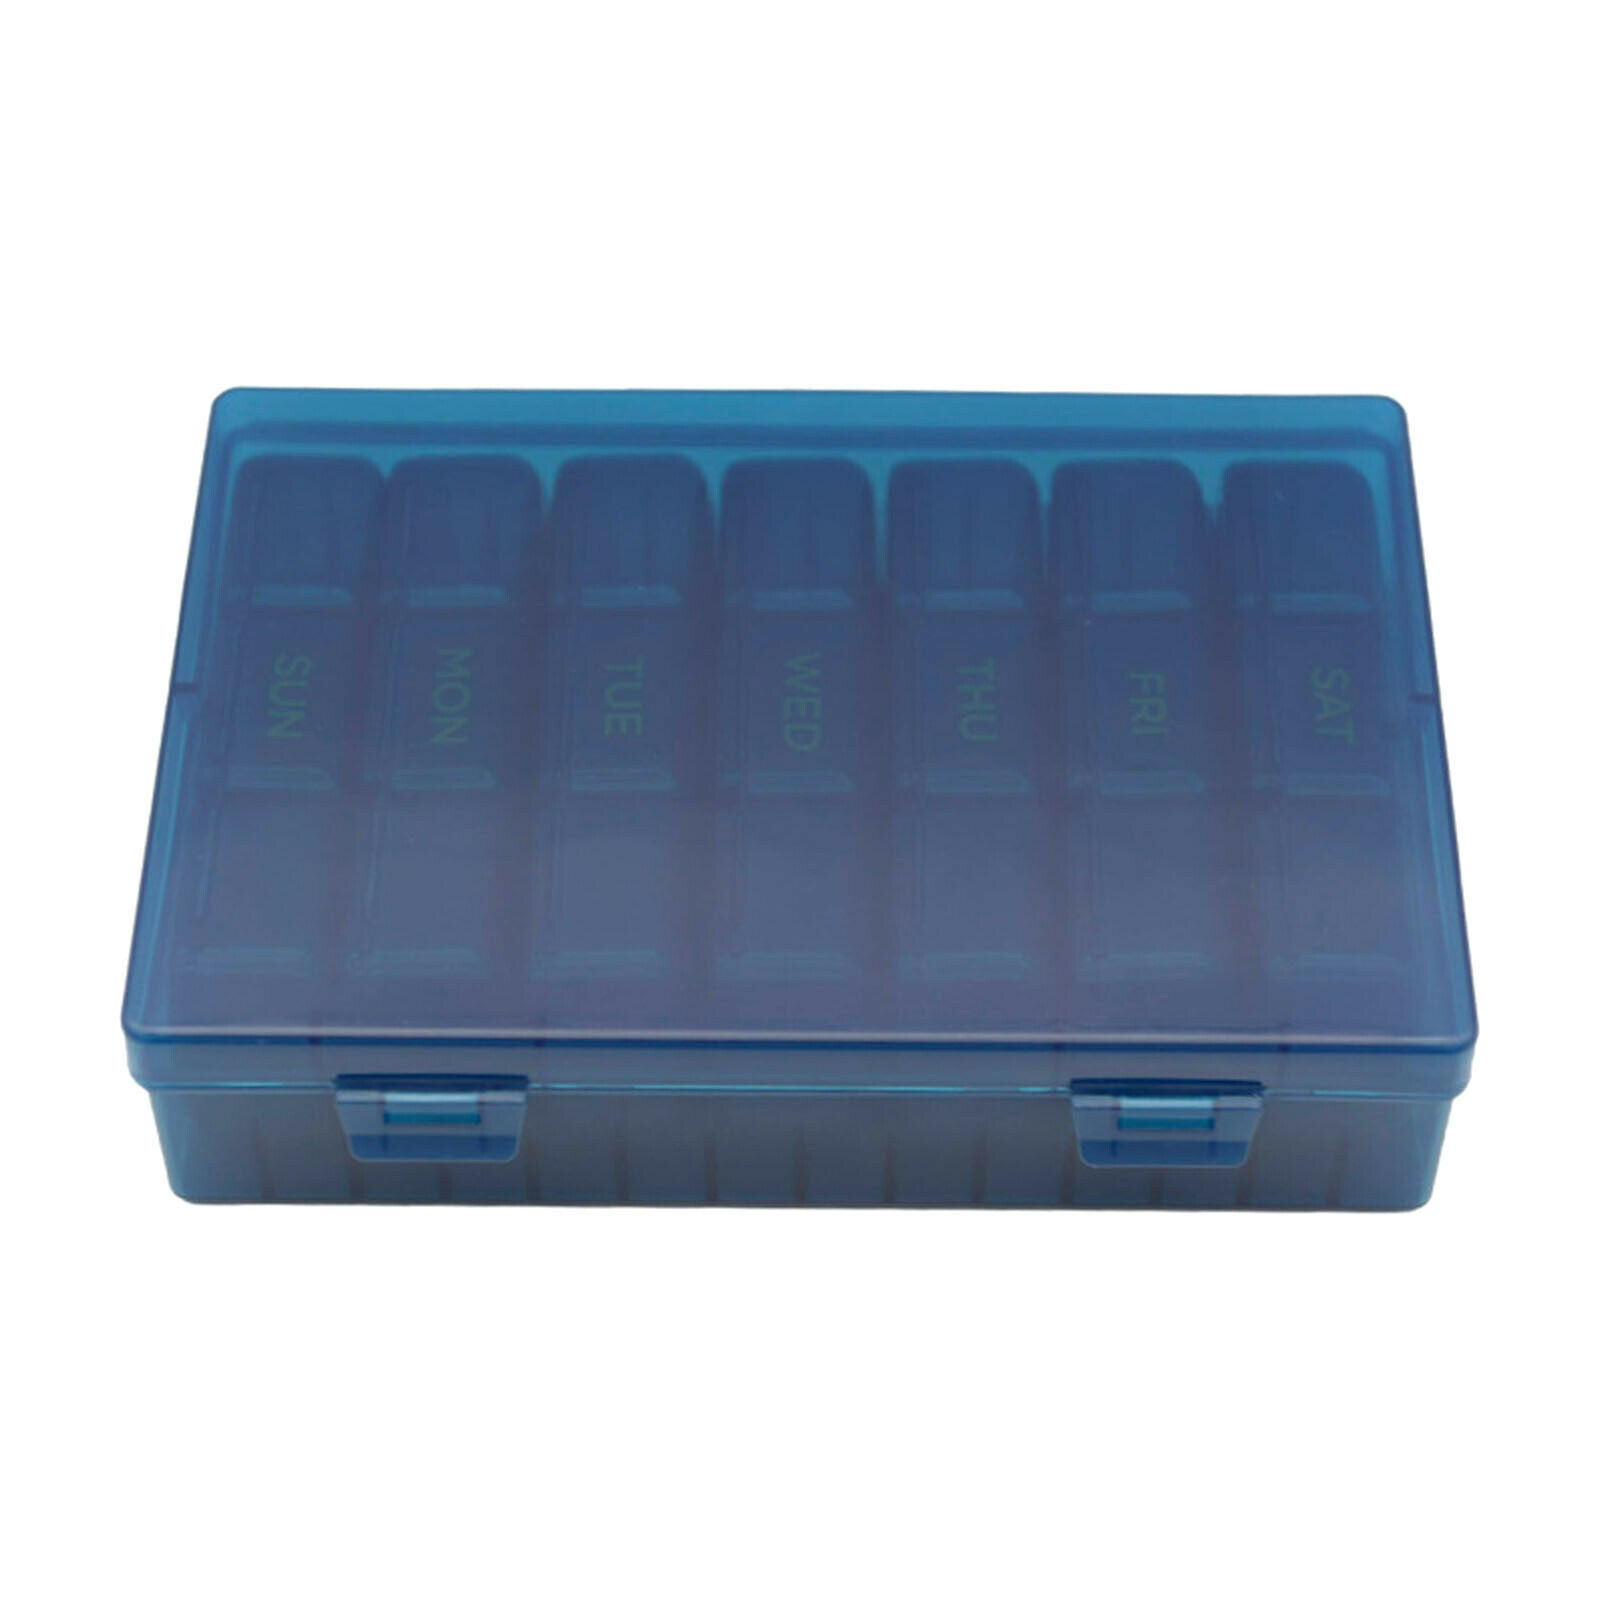 Compact Weekly Holder Medicine Box Storage for Travel Home Use School Elders